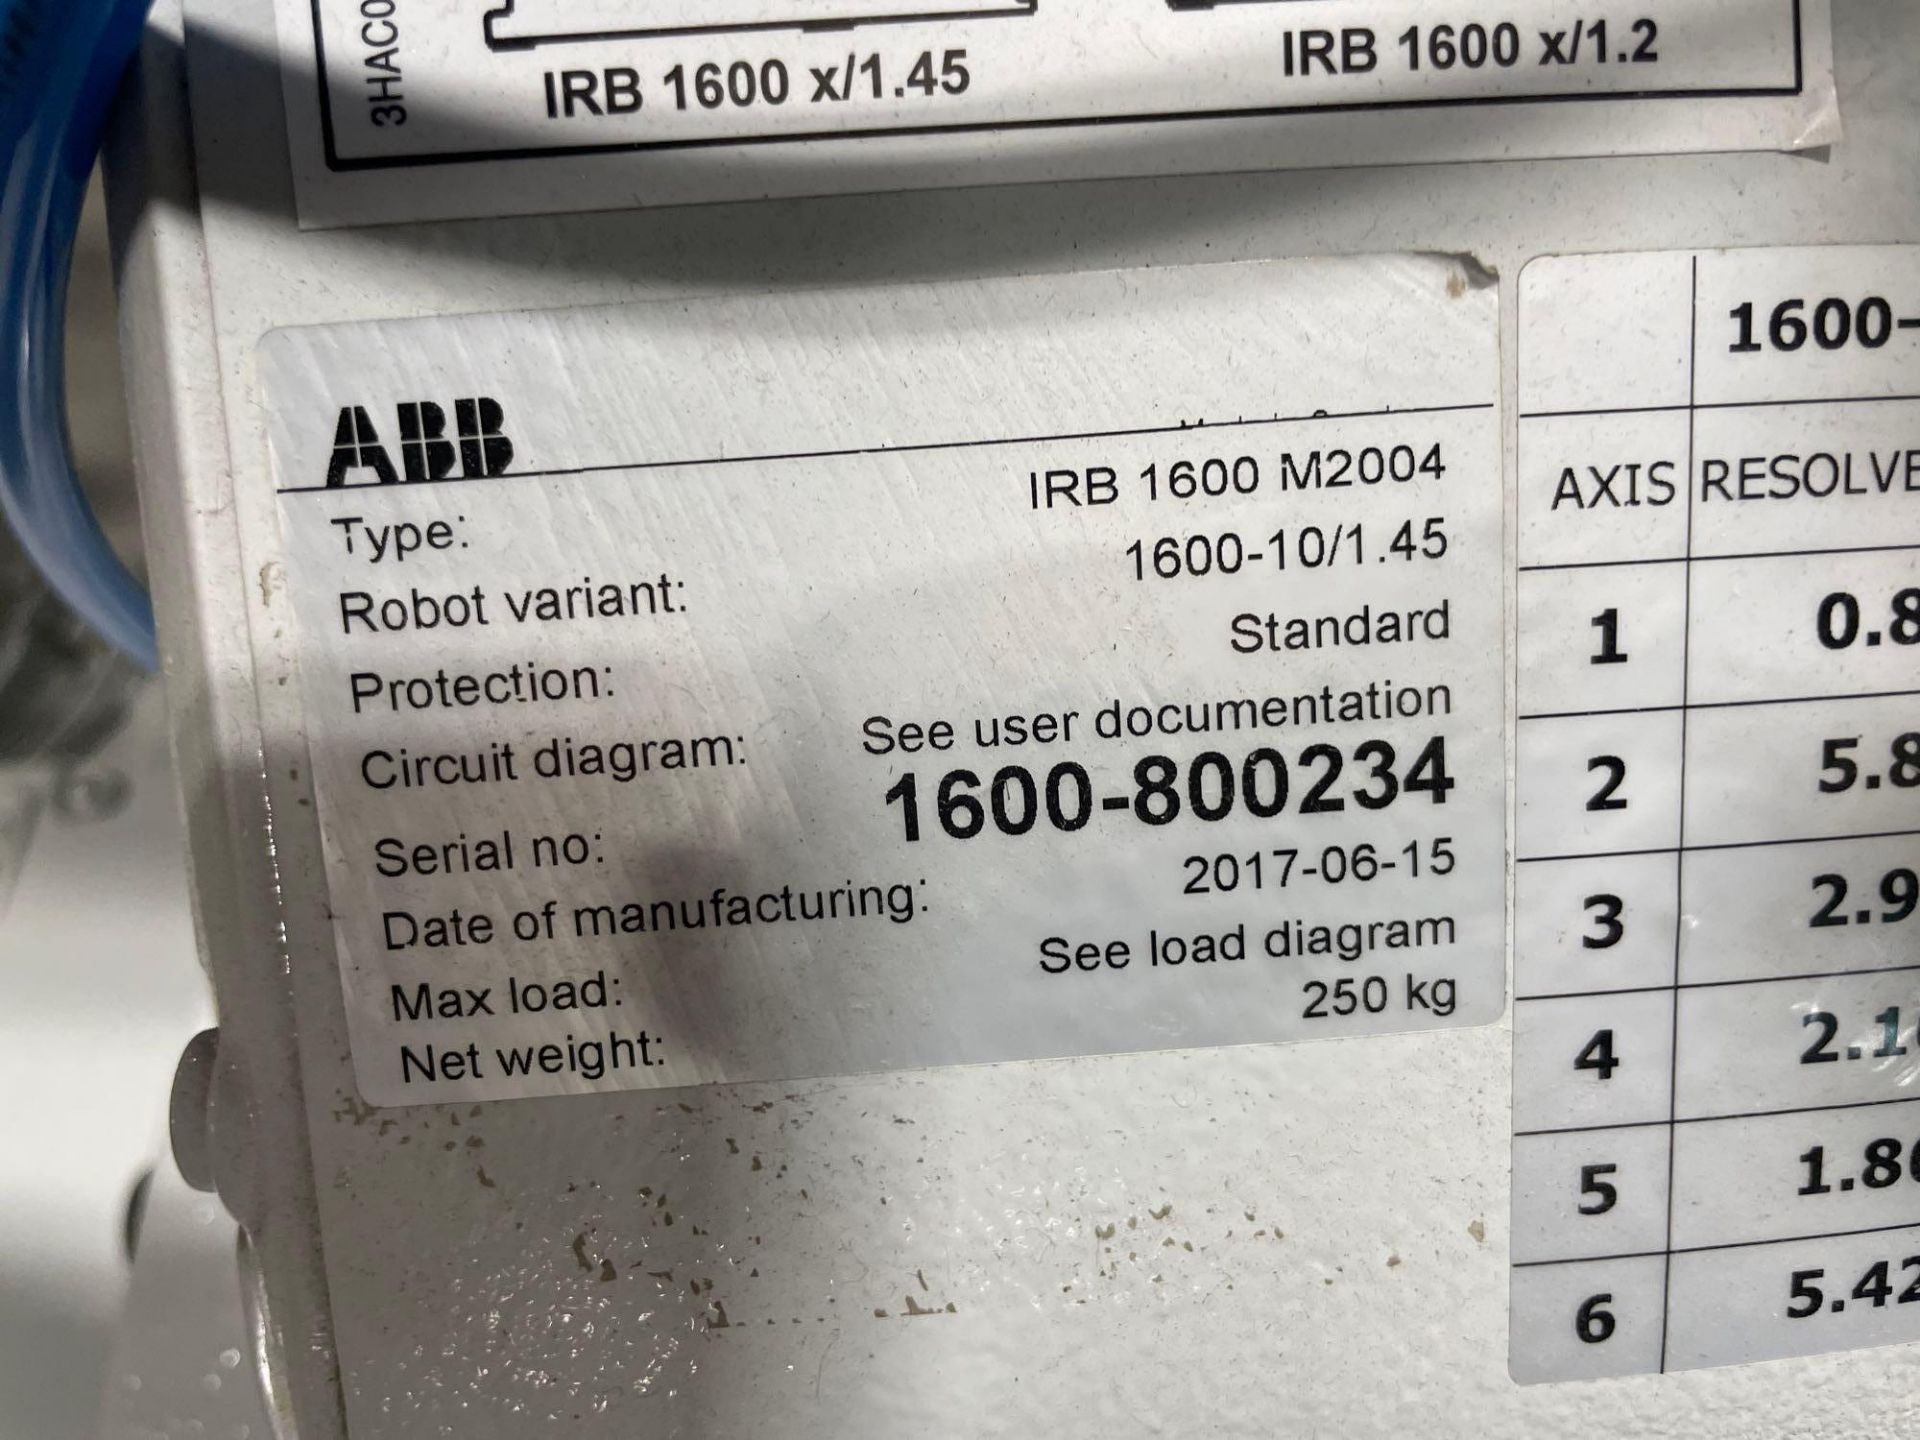 ABB IRB 1600 M2004 6-Axis Robot w/ Power Supply, 10 kg Cap., New 2017 - Image 6 of 11